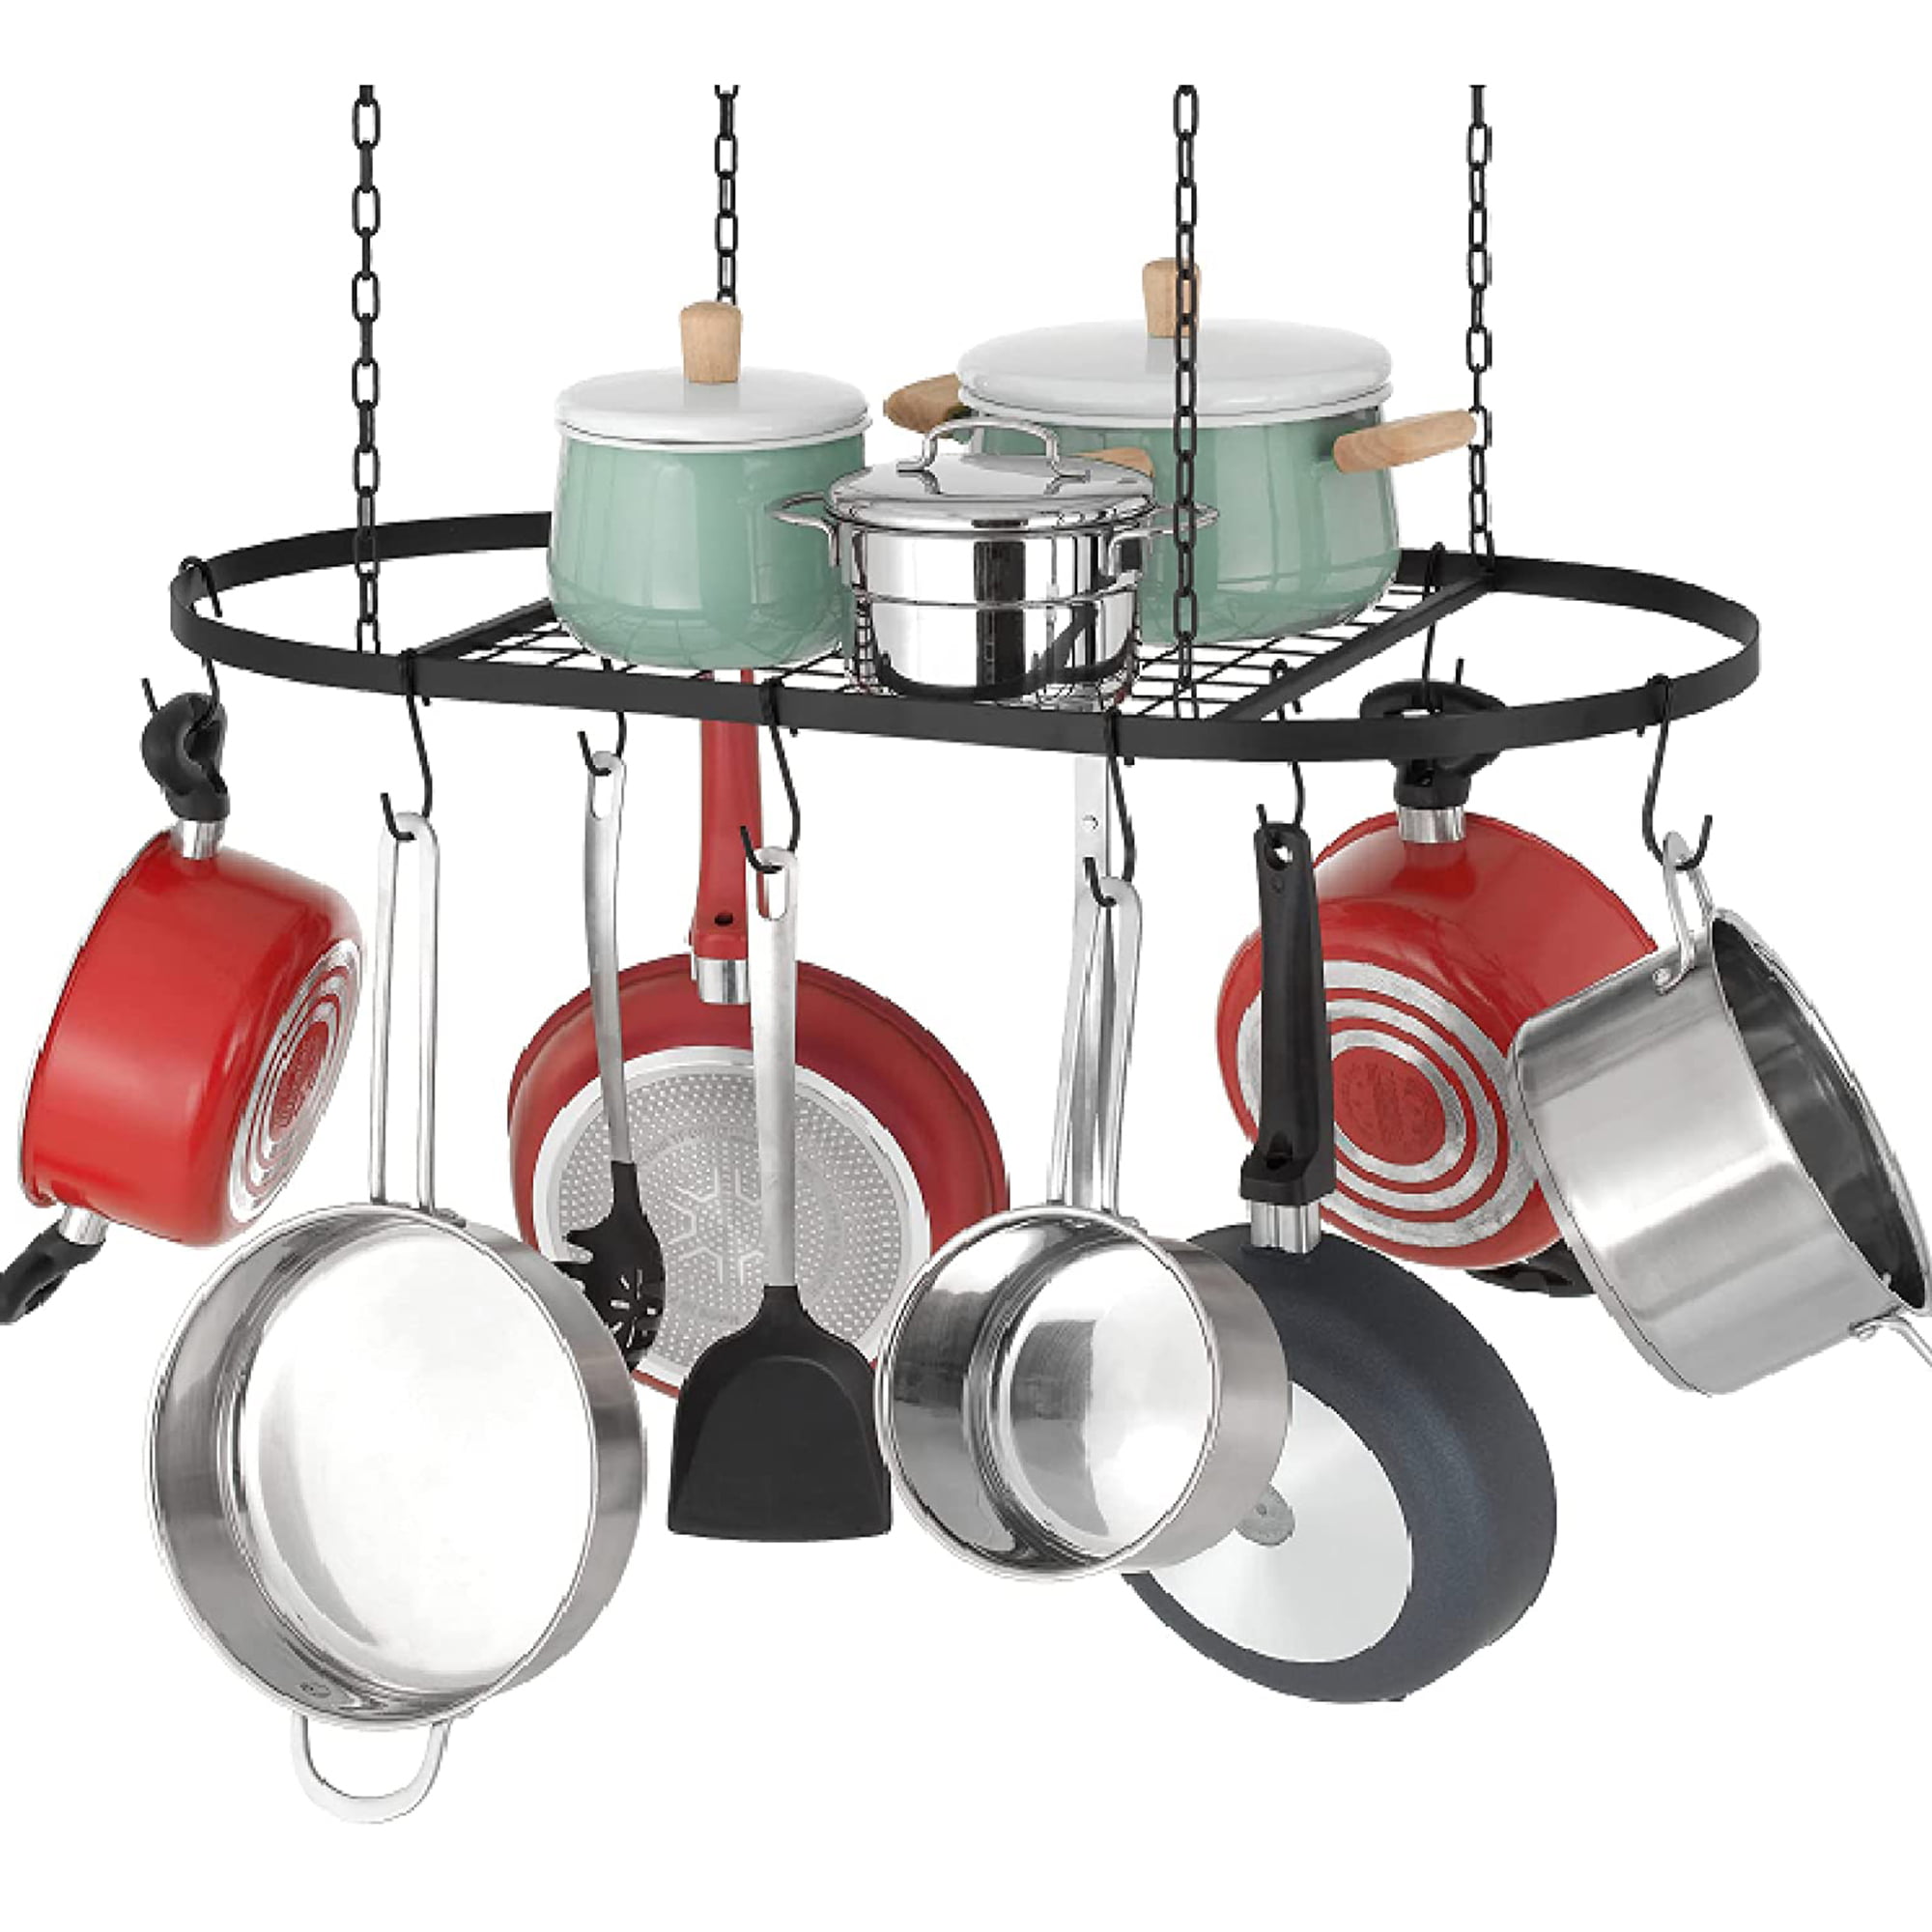 Decorative Mounted Storage Oval With Hooks Pot and Pan Rack for Ceiling Hanger